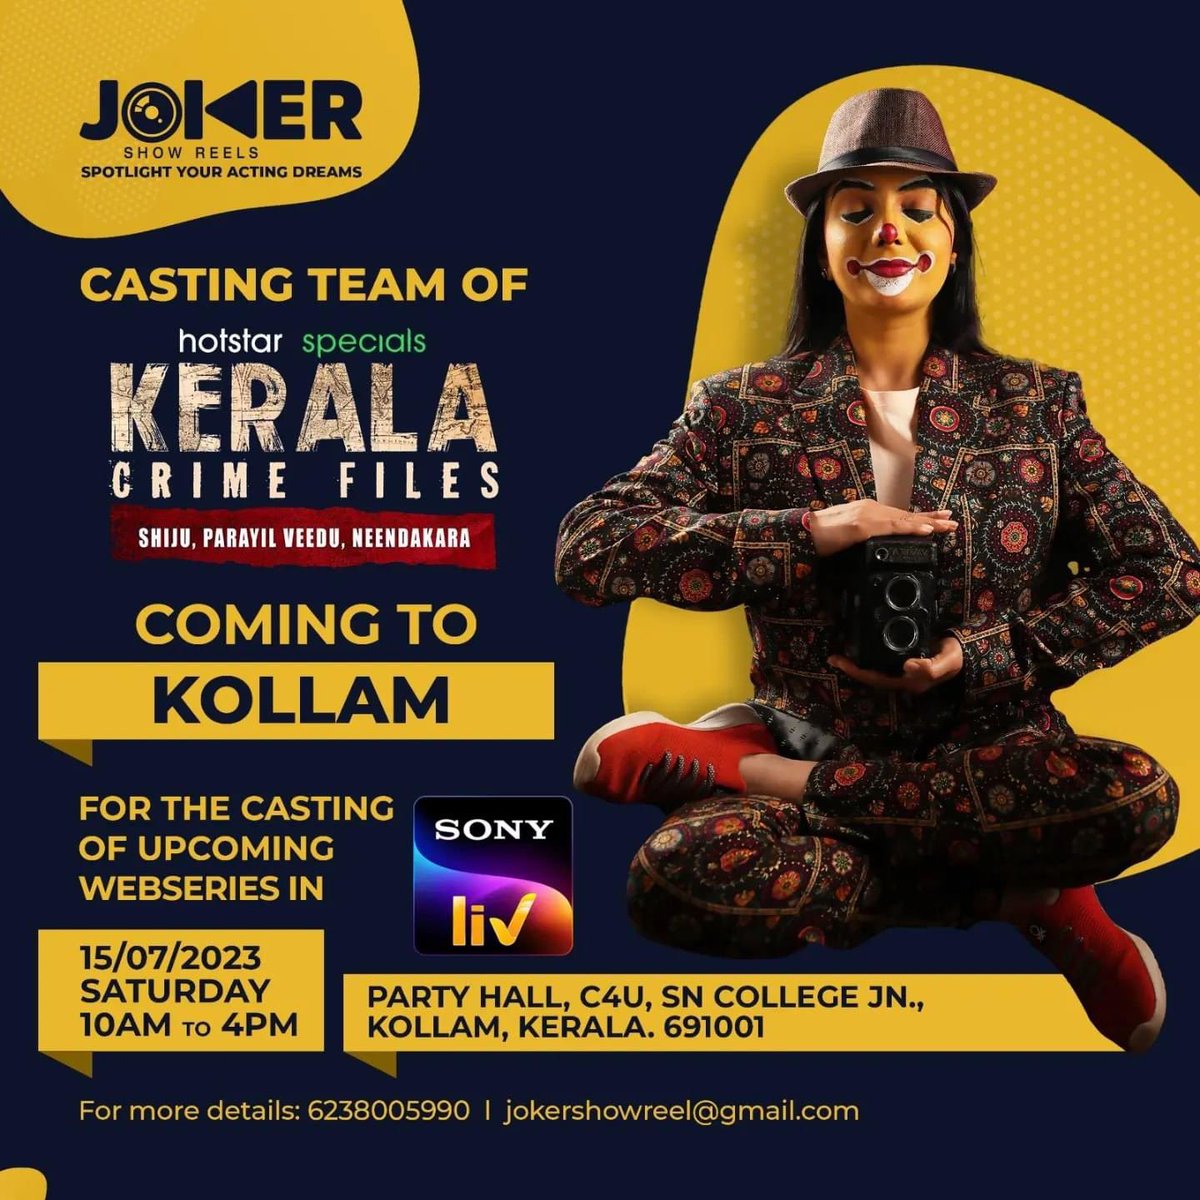 Casting Call 🎭 Web Series

Looking for Male & Female actors. Check poster for more details! 

#arh #auditionsarehere #castingcall #webseries #maleactor #femaleactress #malayalam #sonyliv #sonylivoriginals #kollam #femaleactress